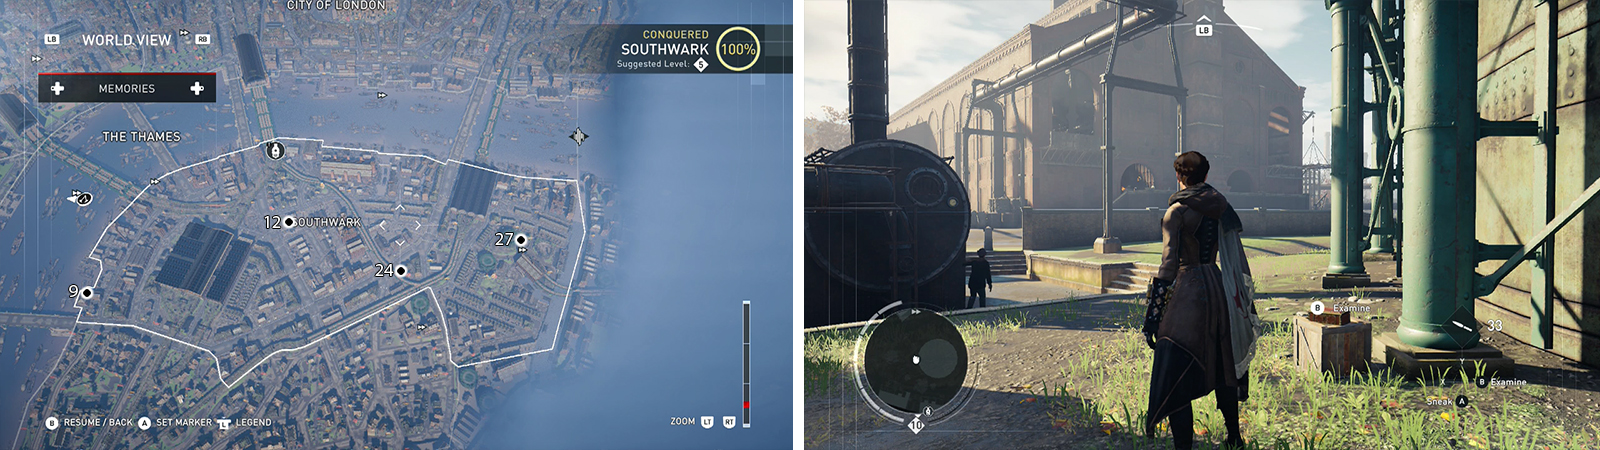 The Secrets of London can be found on the map (left). Location of Secret of London #27 pictured (right).